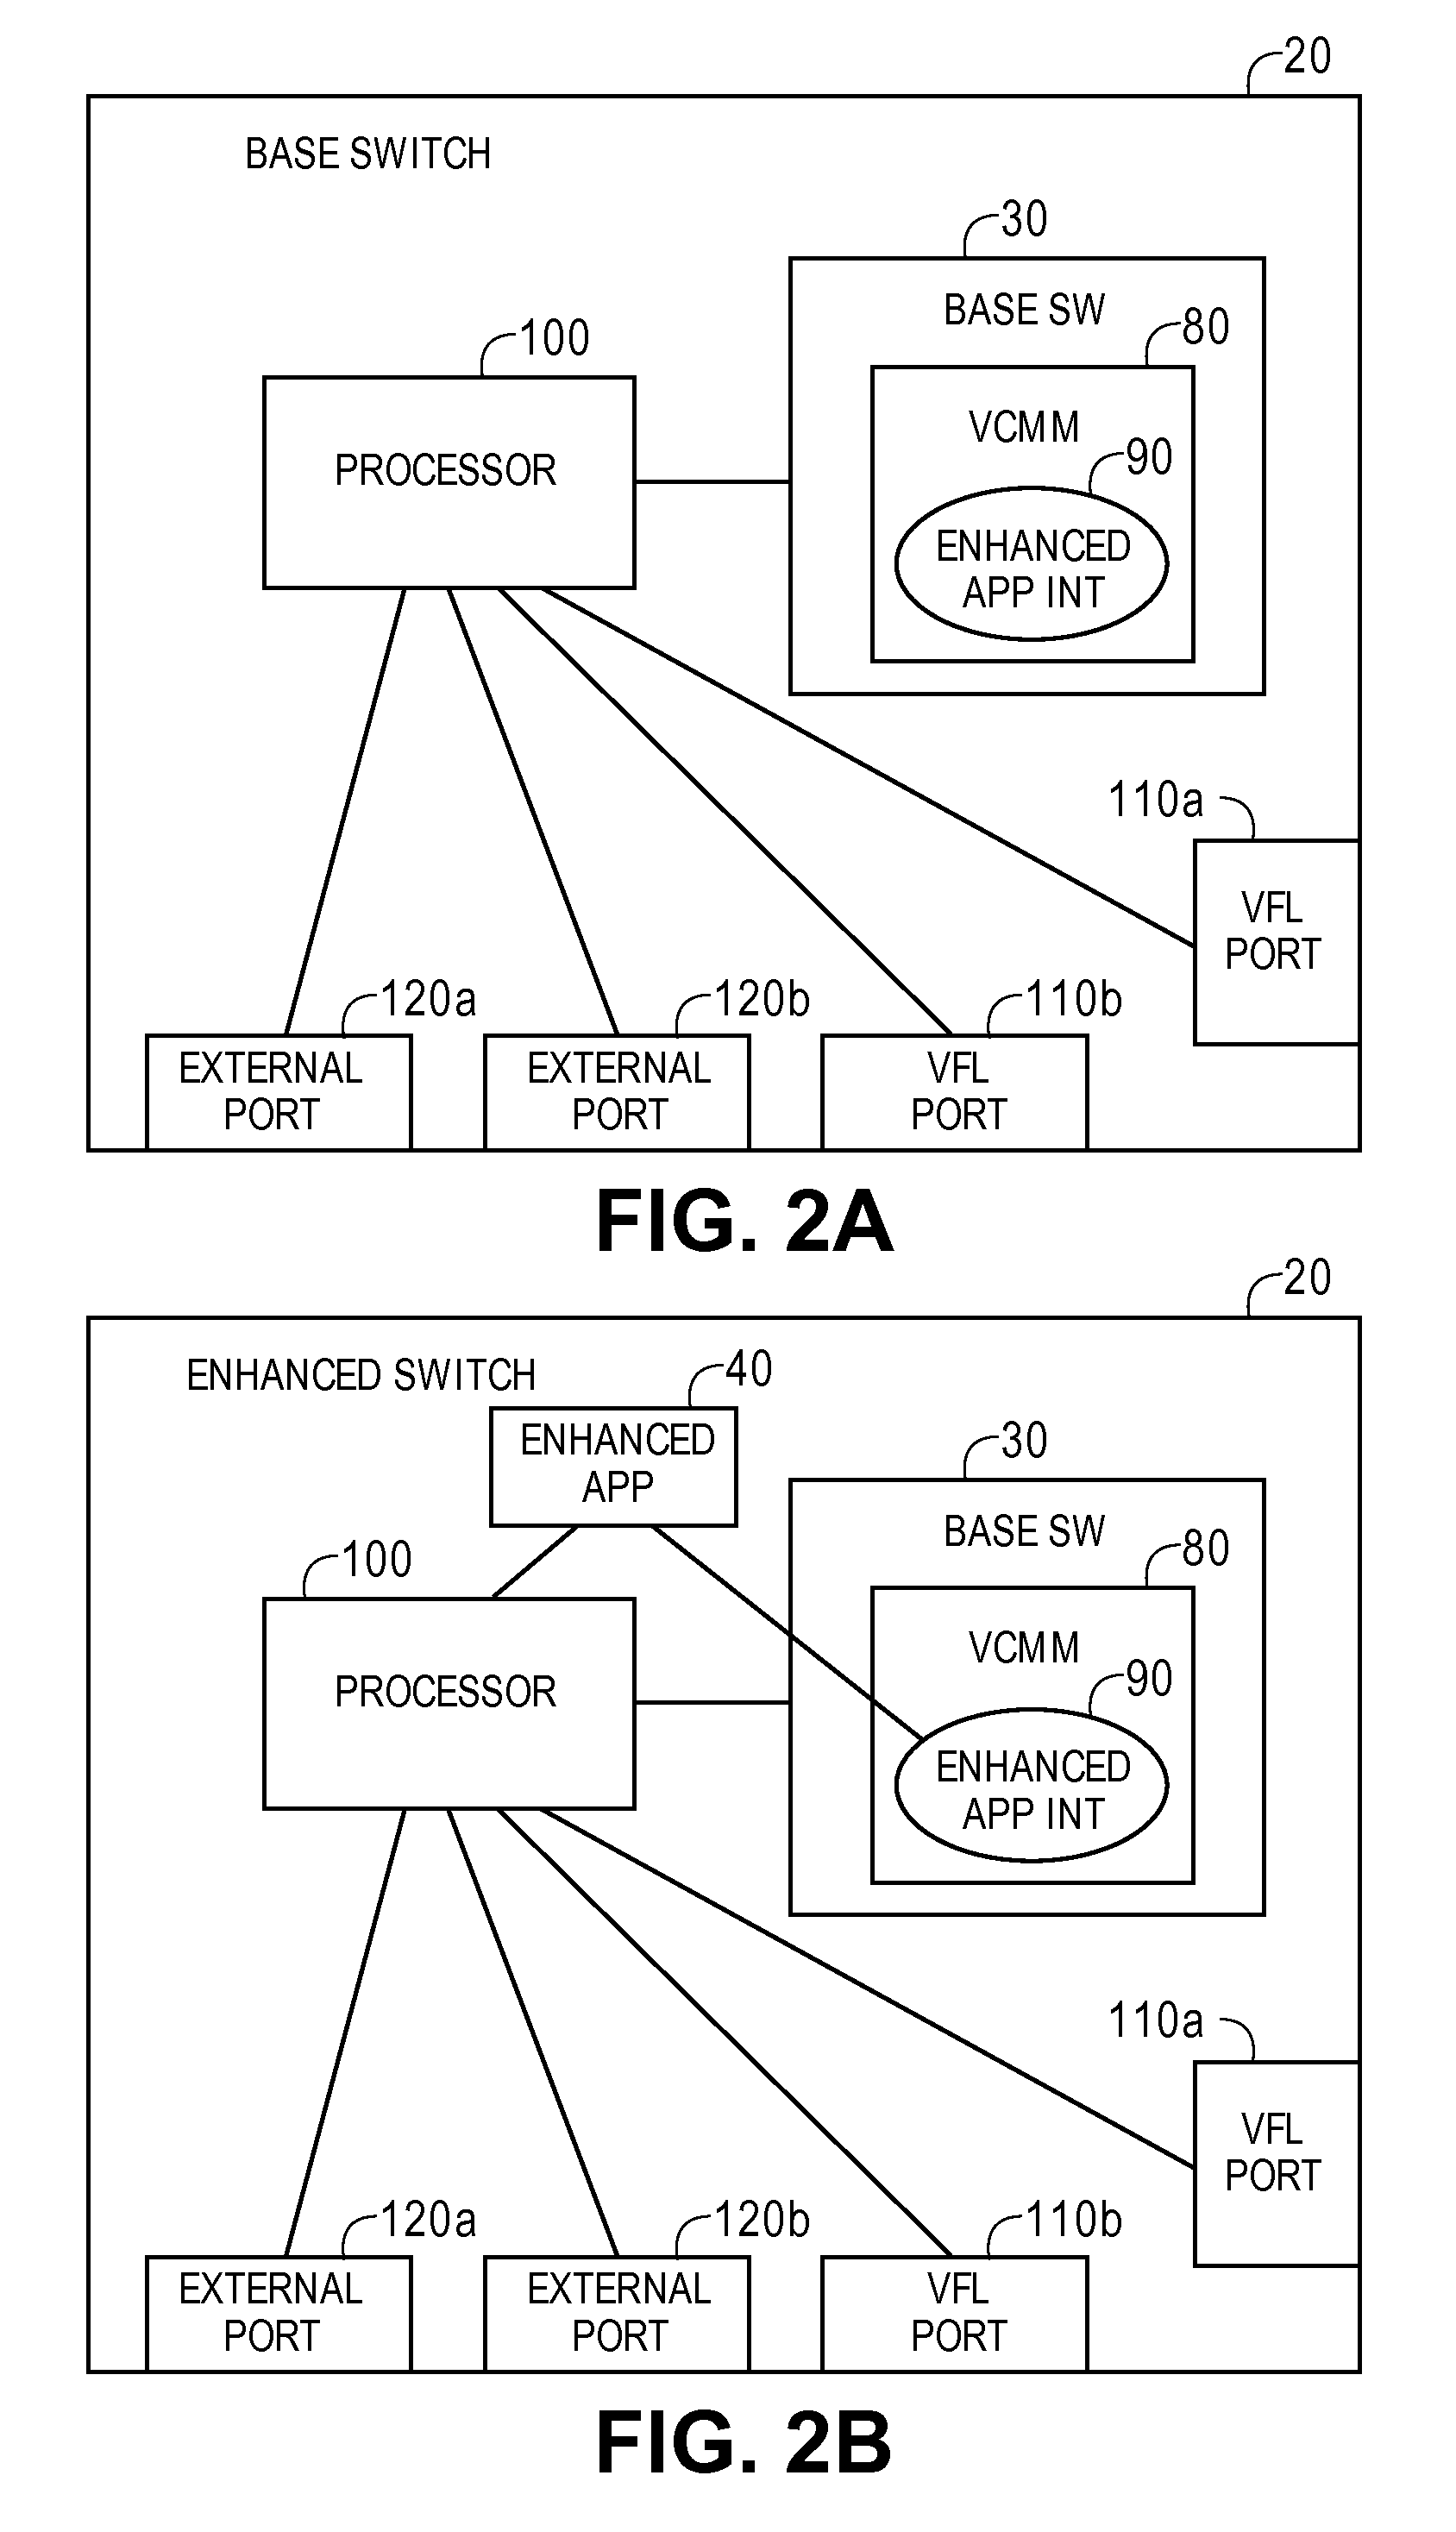 Layered Third Party Application Software Redundancy in a Non-Homogenous Virtual Chassis